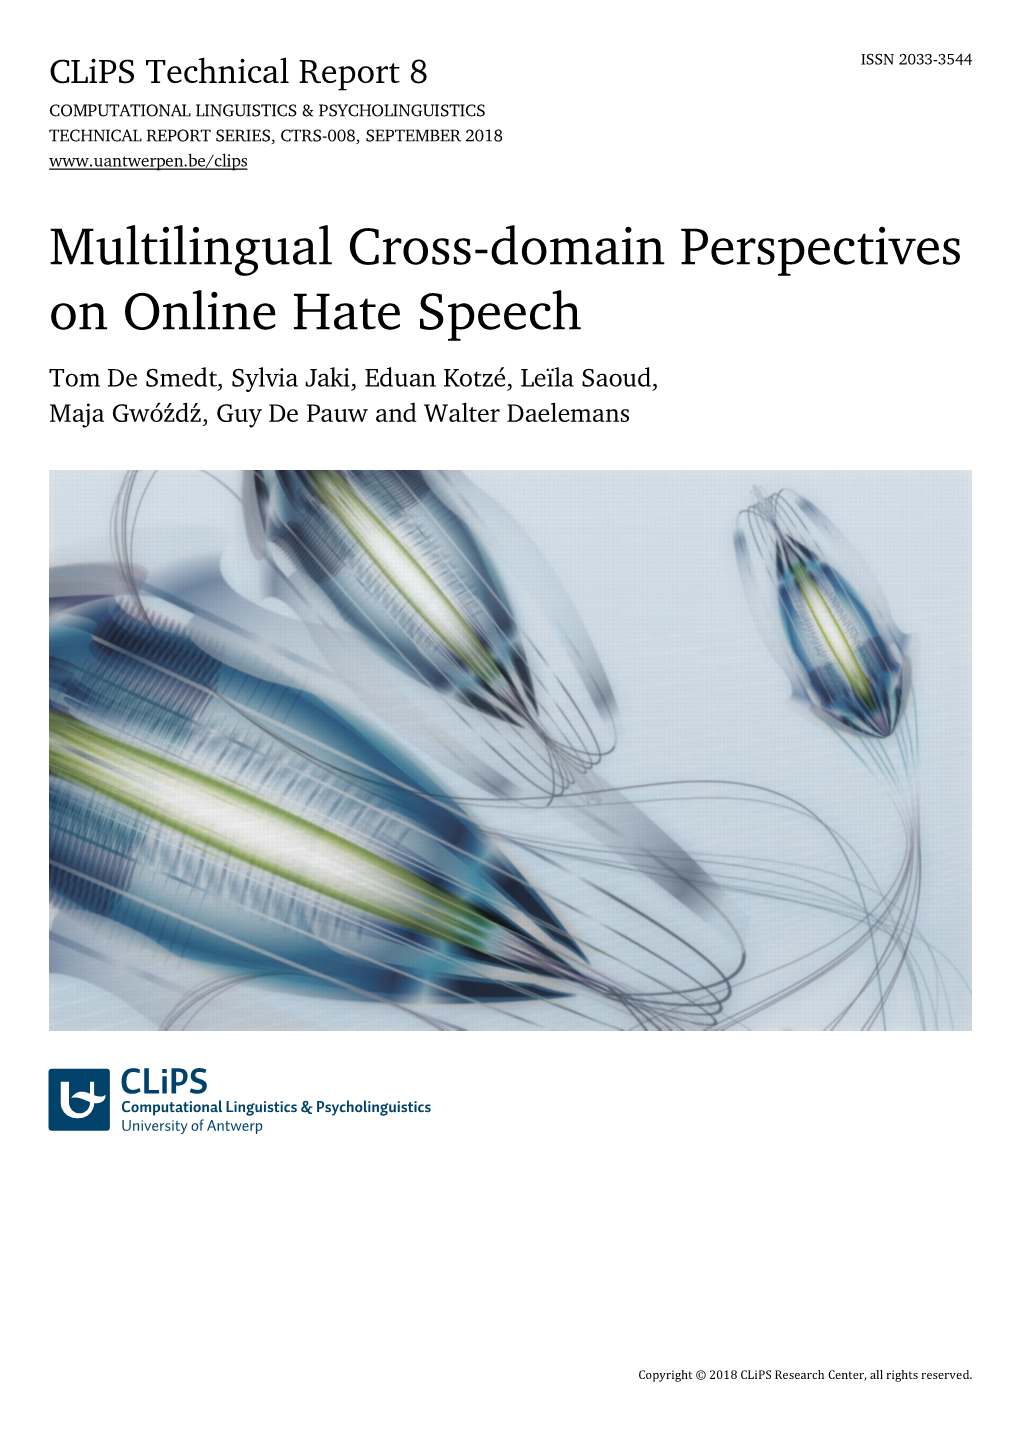 Multilingual Cross-Domain Perspectives on Online Hate Speech